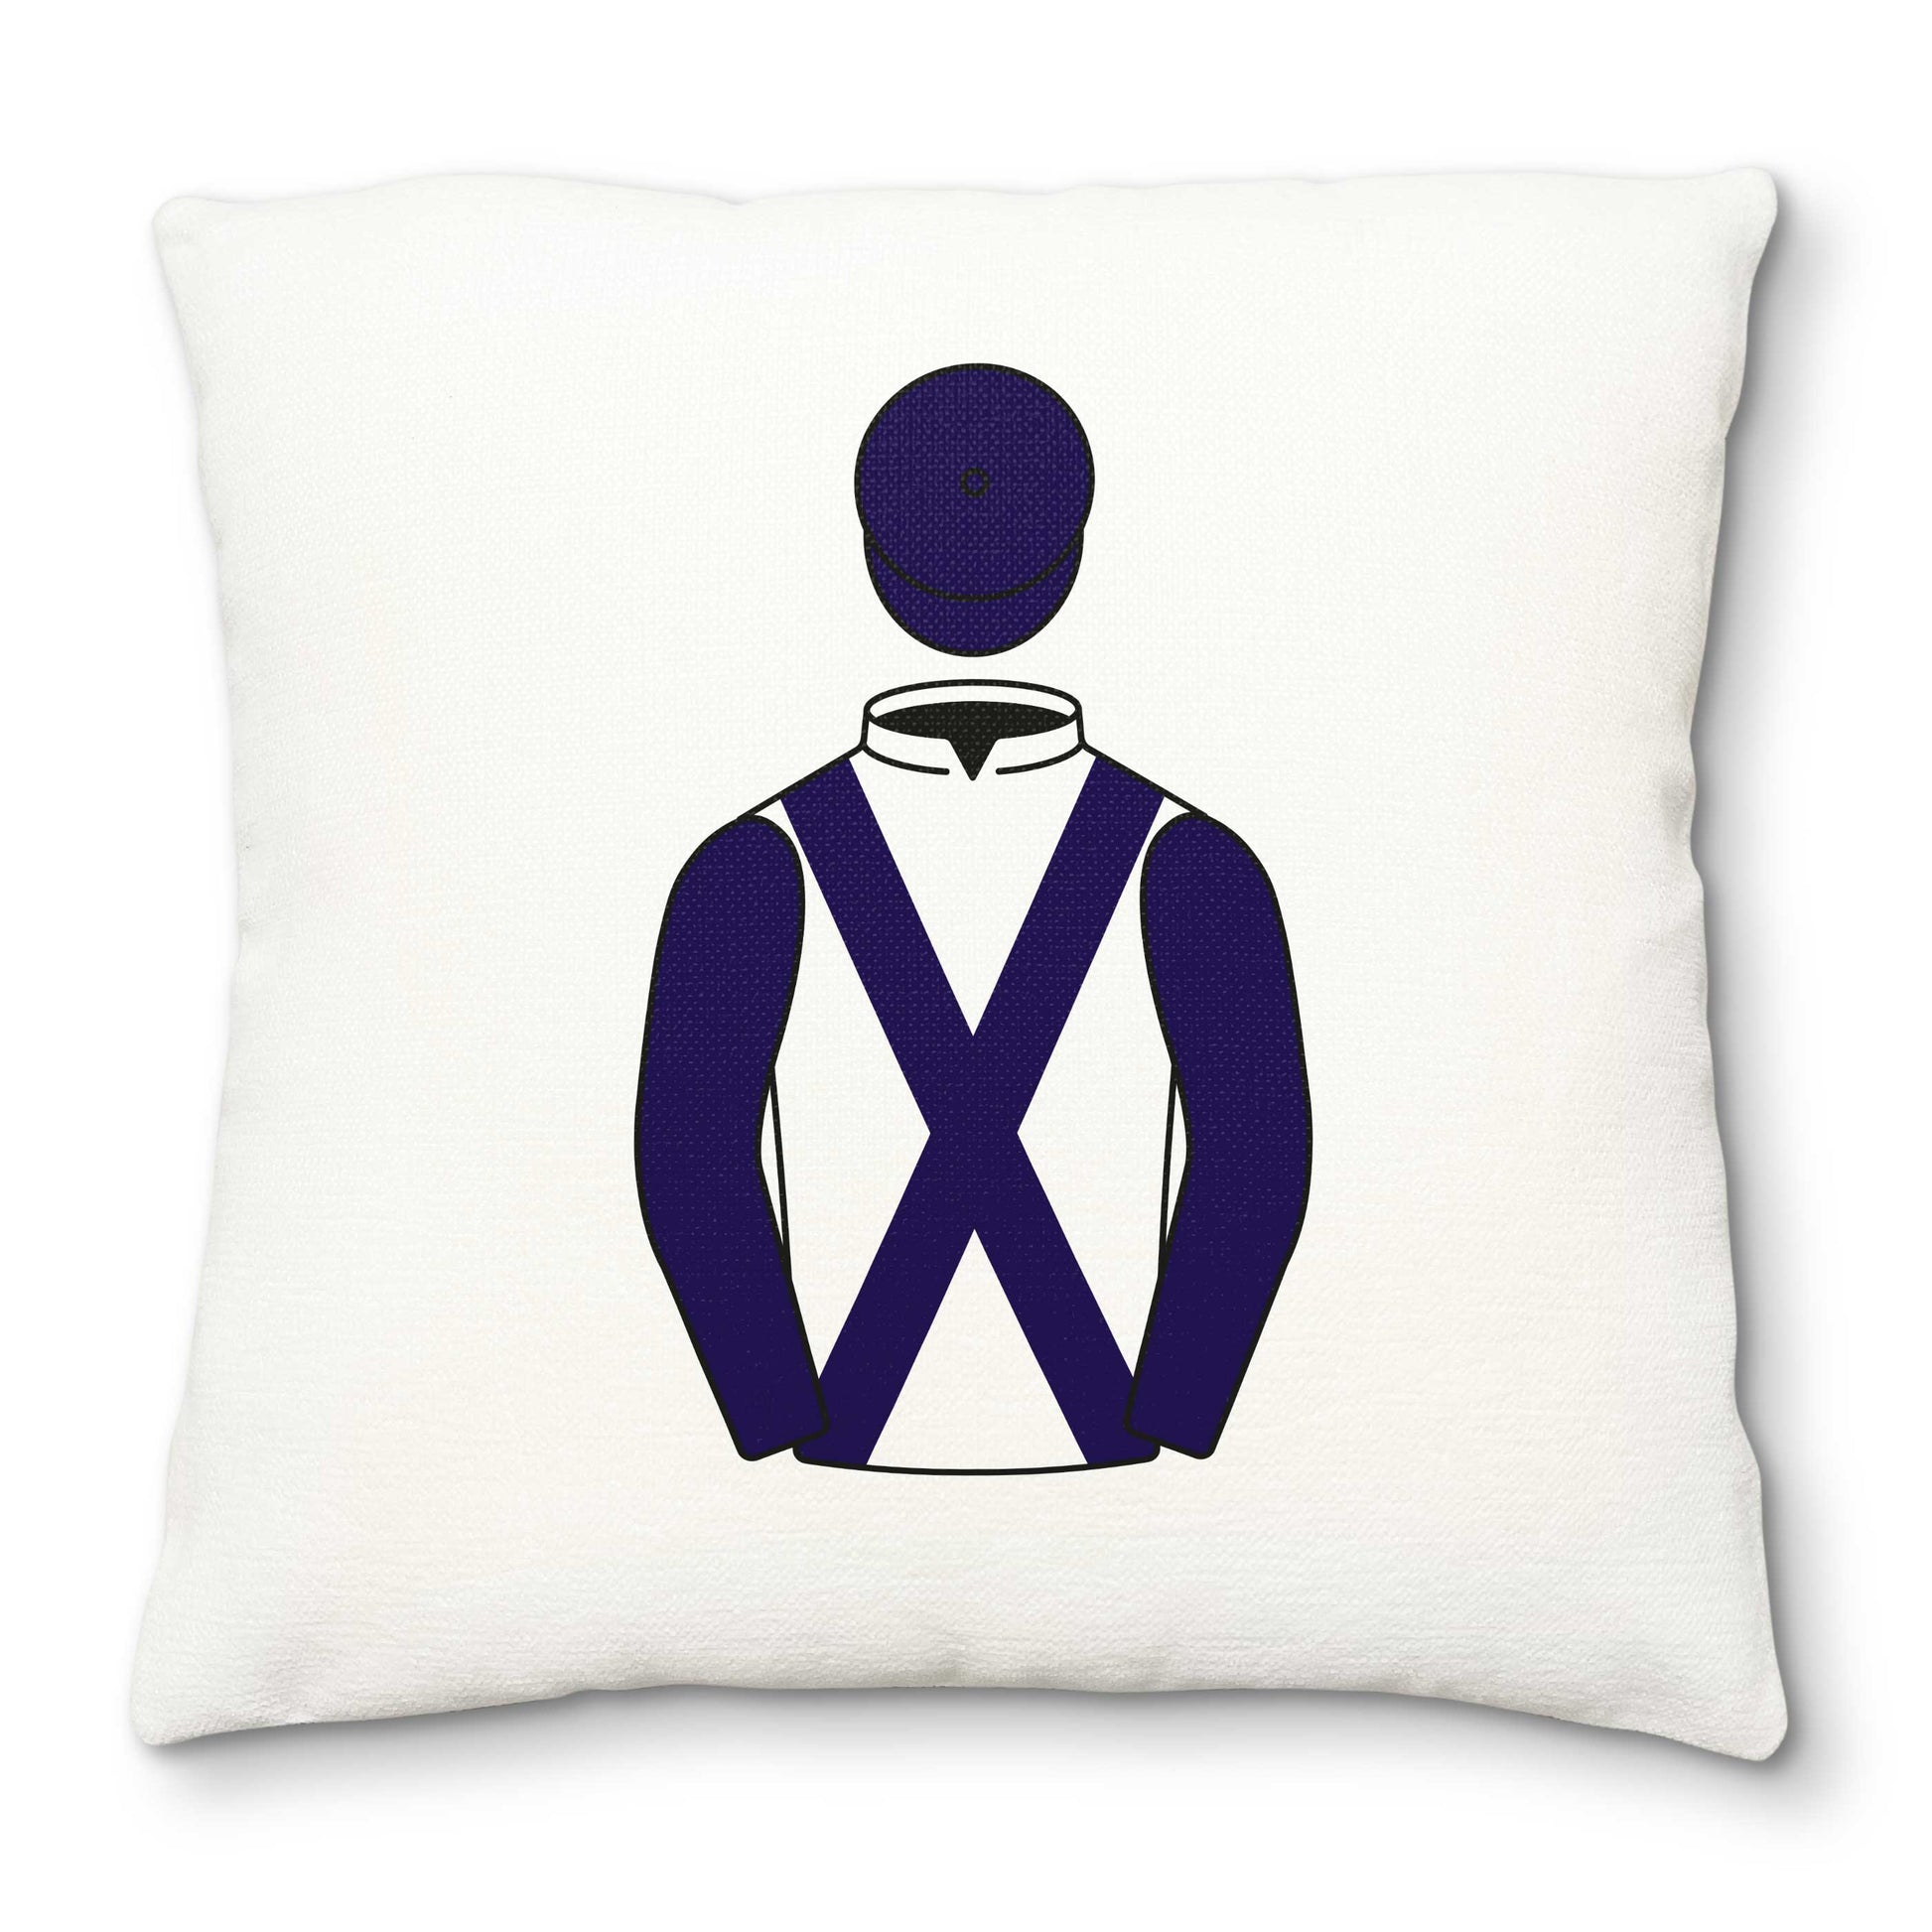 Rockcliffe Stud Deluxe Cushion Cover - Hacked Up